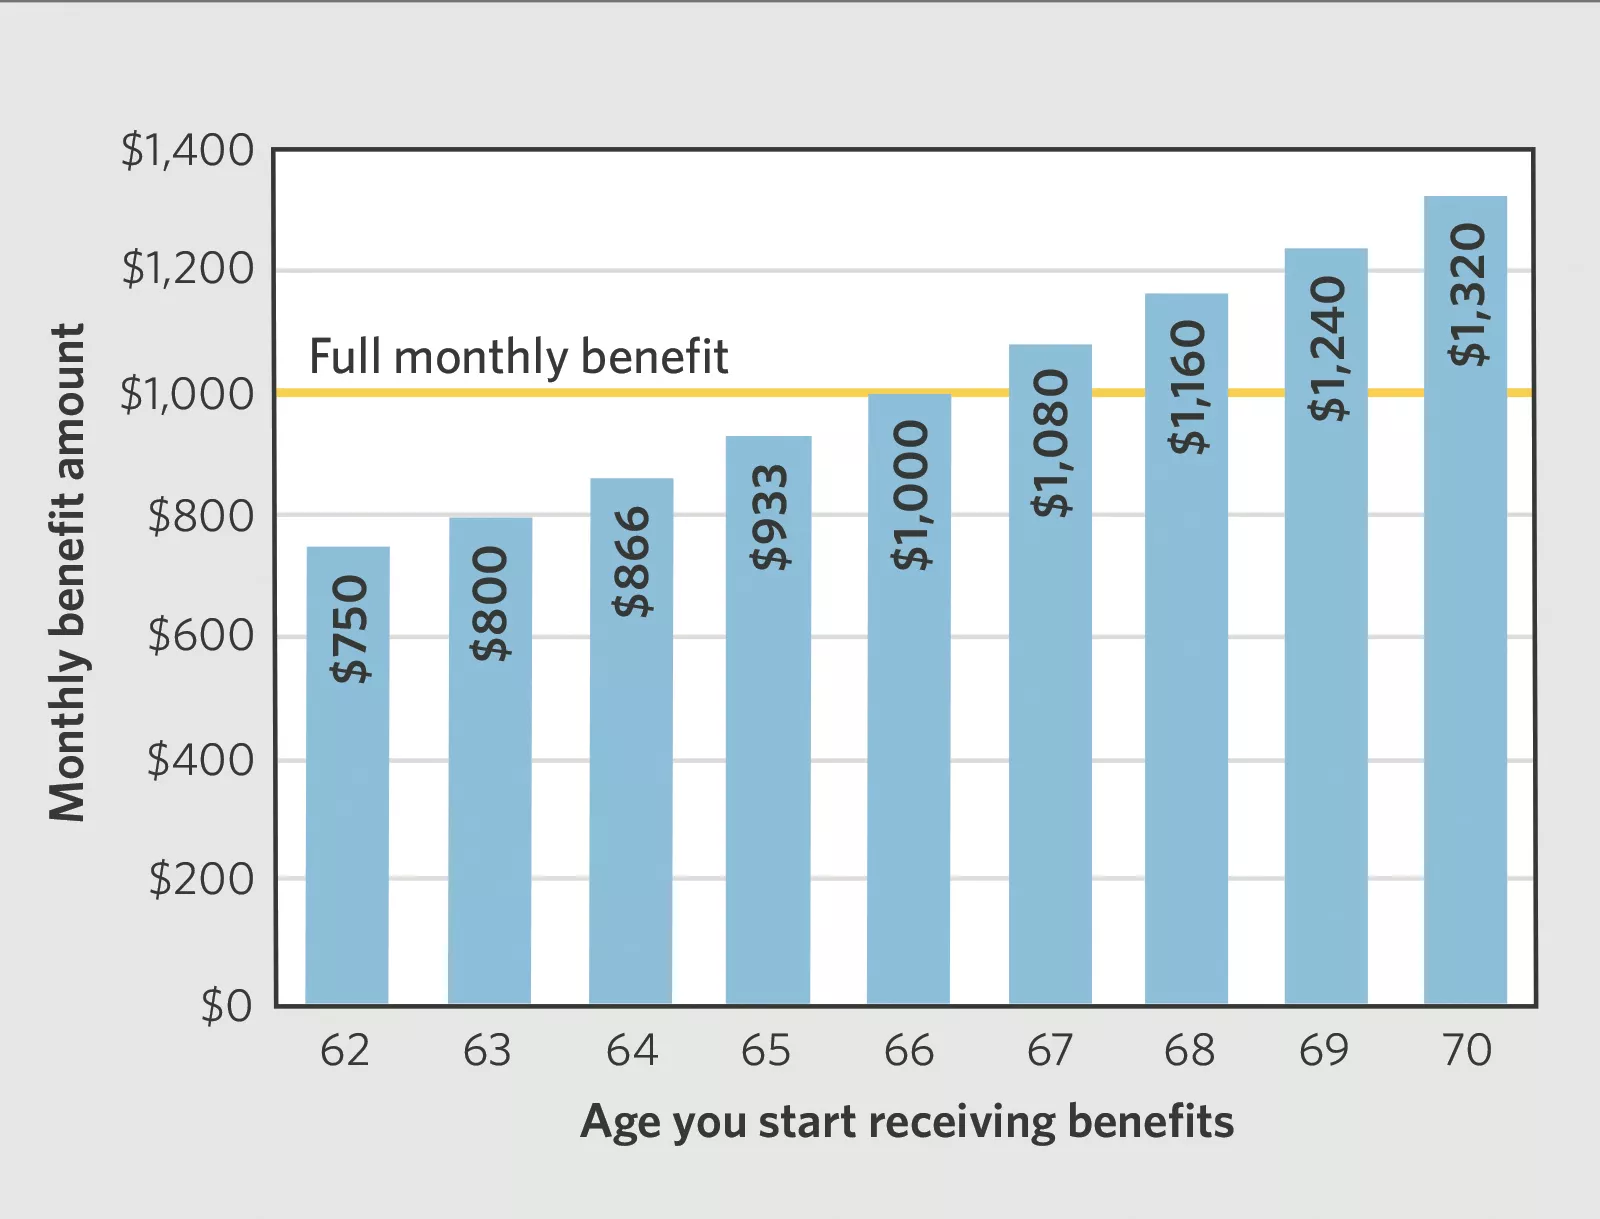  Description for chart showing how monthly benefit amounts differ based on age you start receiving benefits
